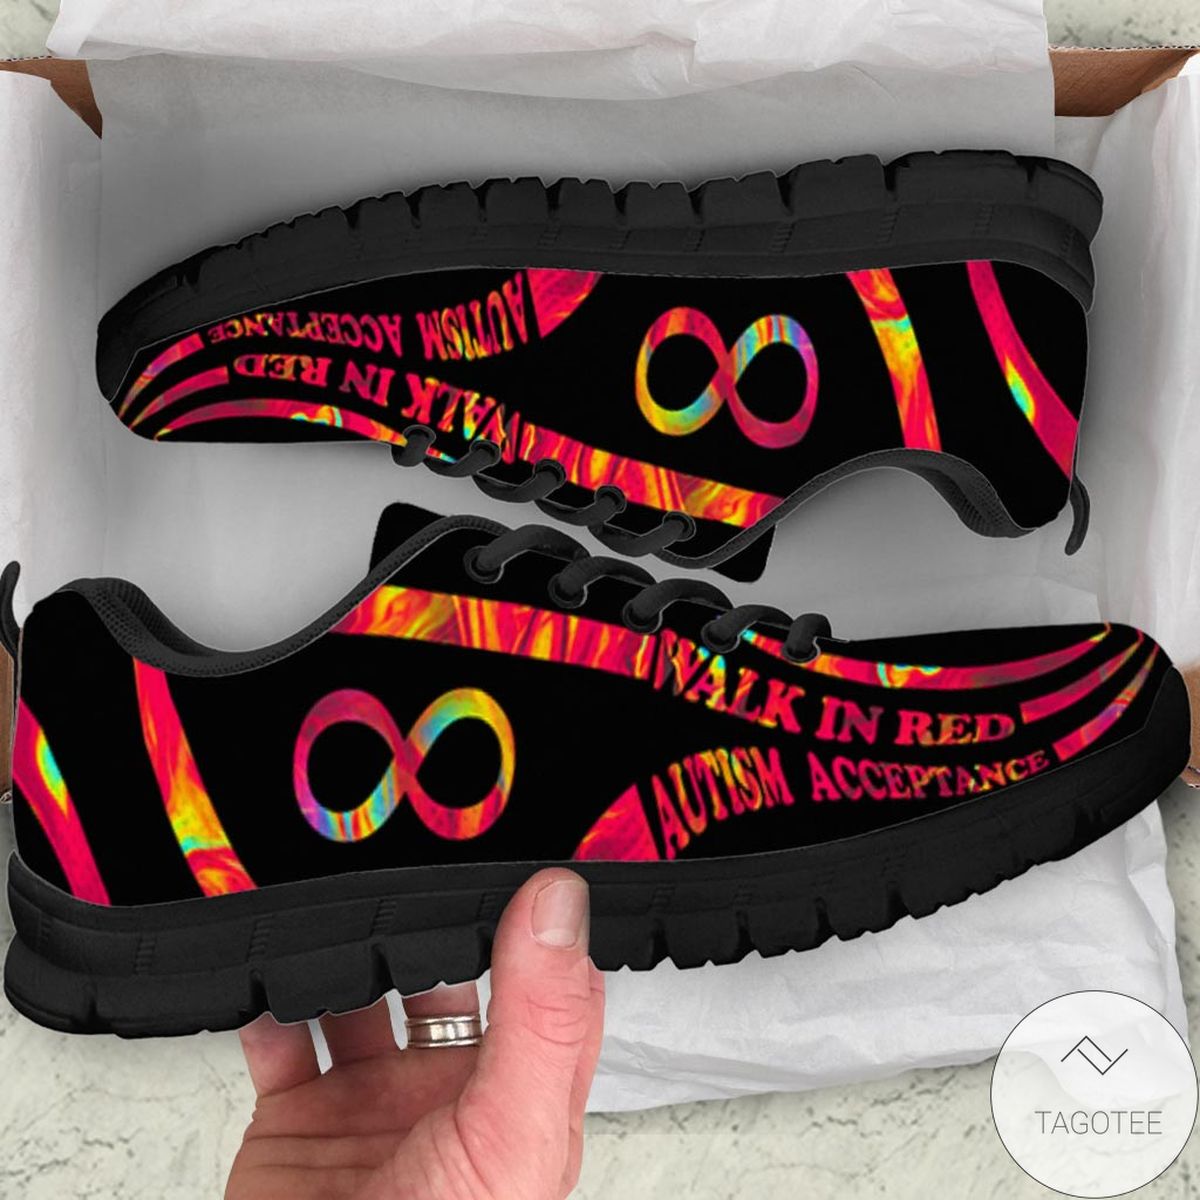 Walk In Red Autism Acceptance Sneakers